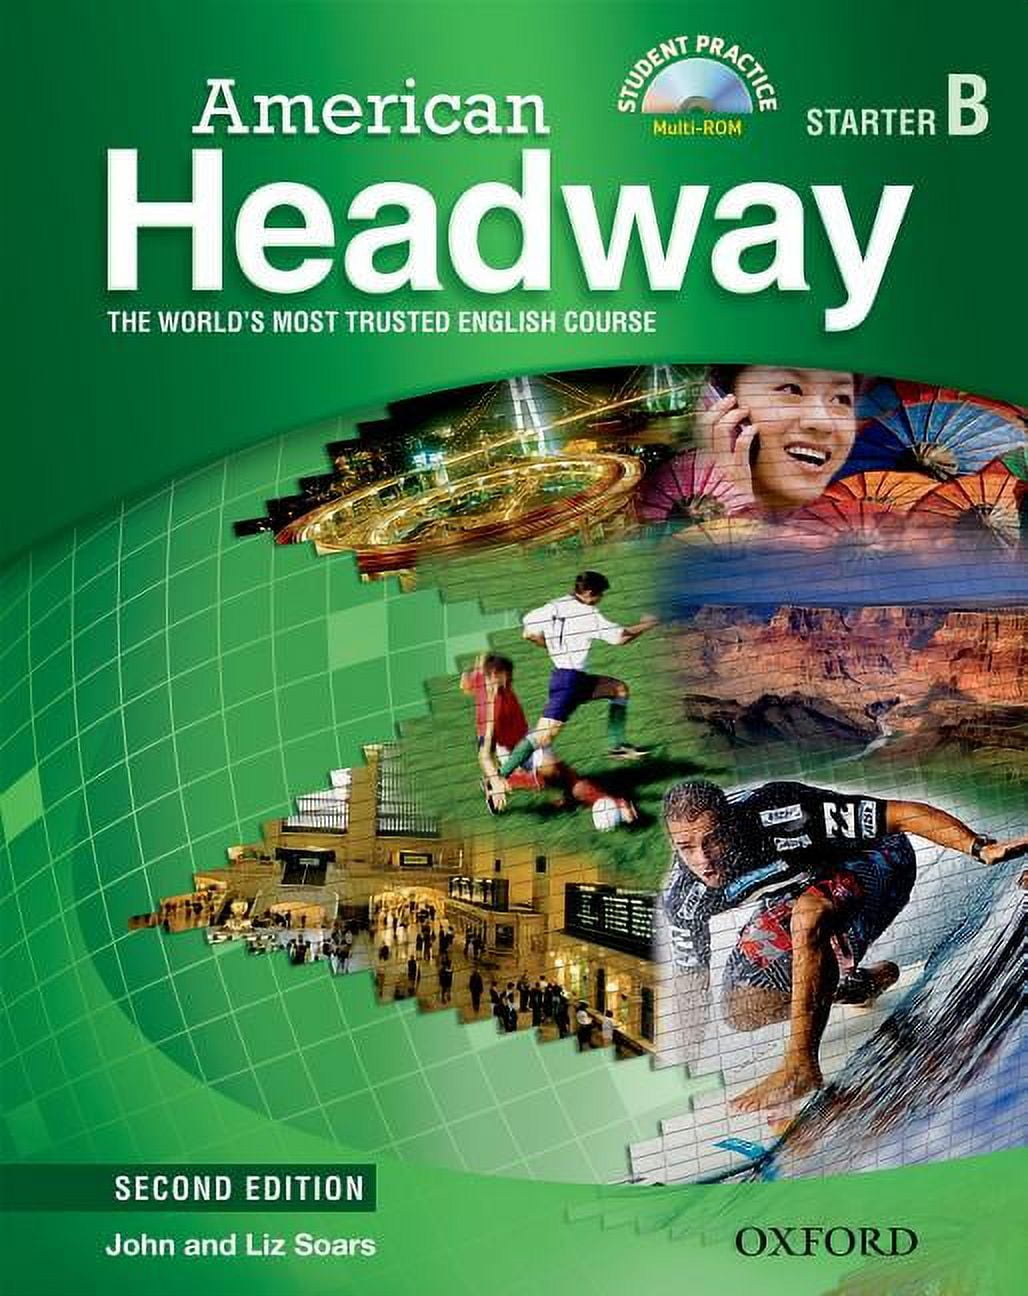 Headway　Student　B　Pack　CD　Book　Starter　American　(Other)